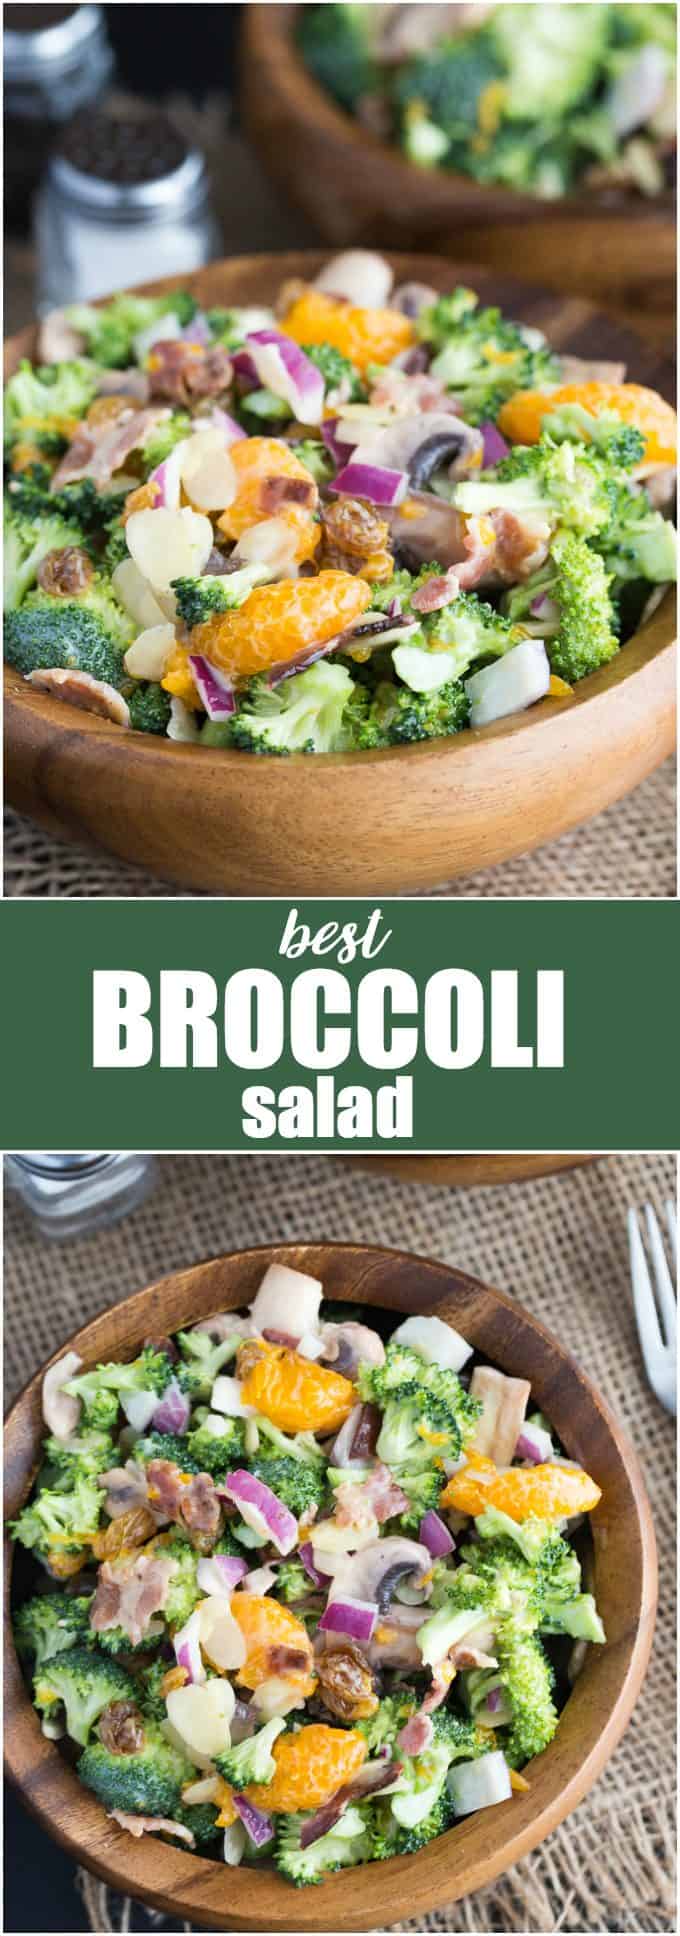 Best Broccoli Salad - Full of fresh, vibrant broccoli, raisins, sliced almonds, mushrooms and sweet mandarin oranges topped with a sweet, creamy dressing. This broccoli salad recipe is both hearty and filling!